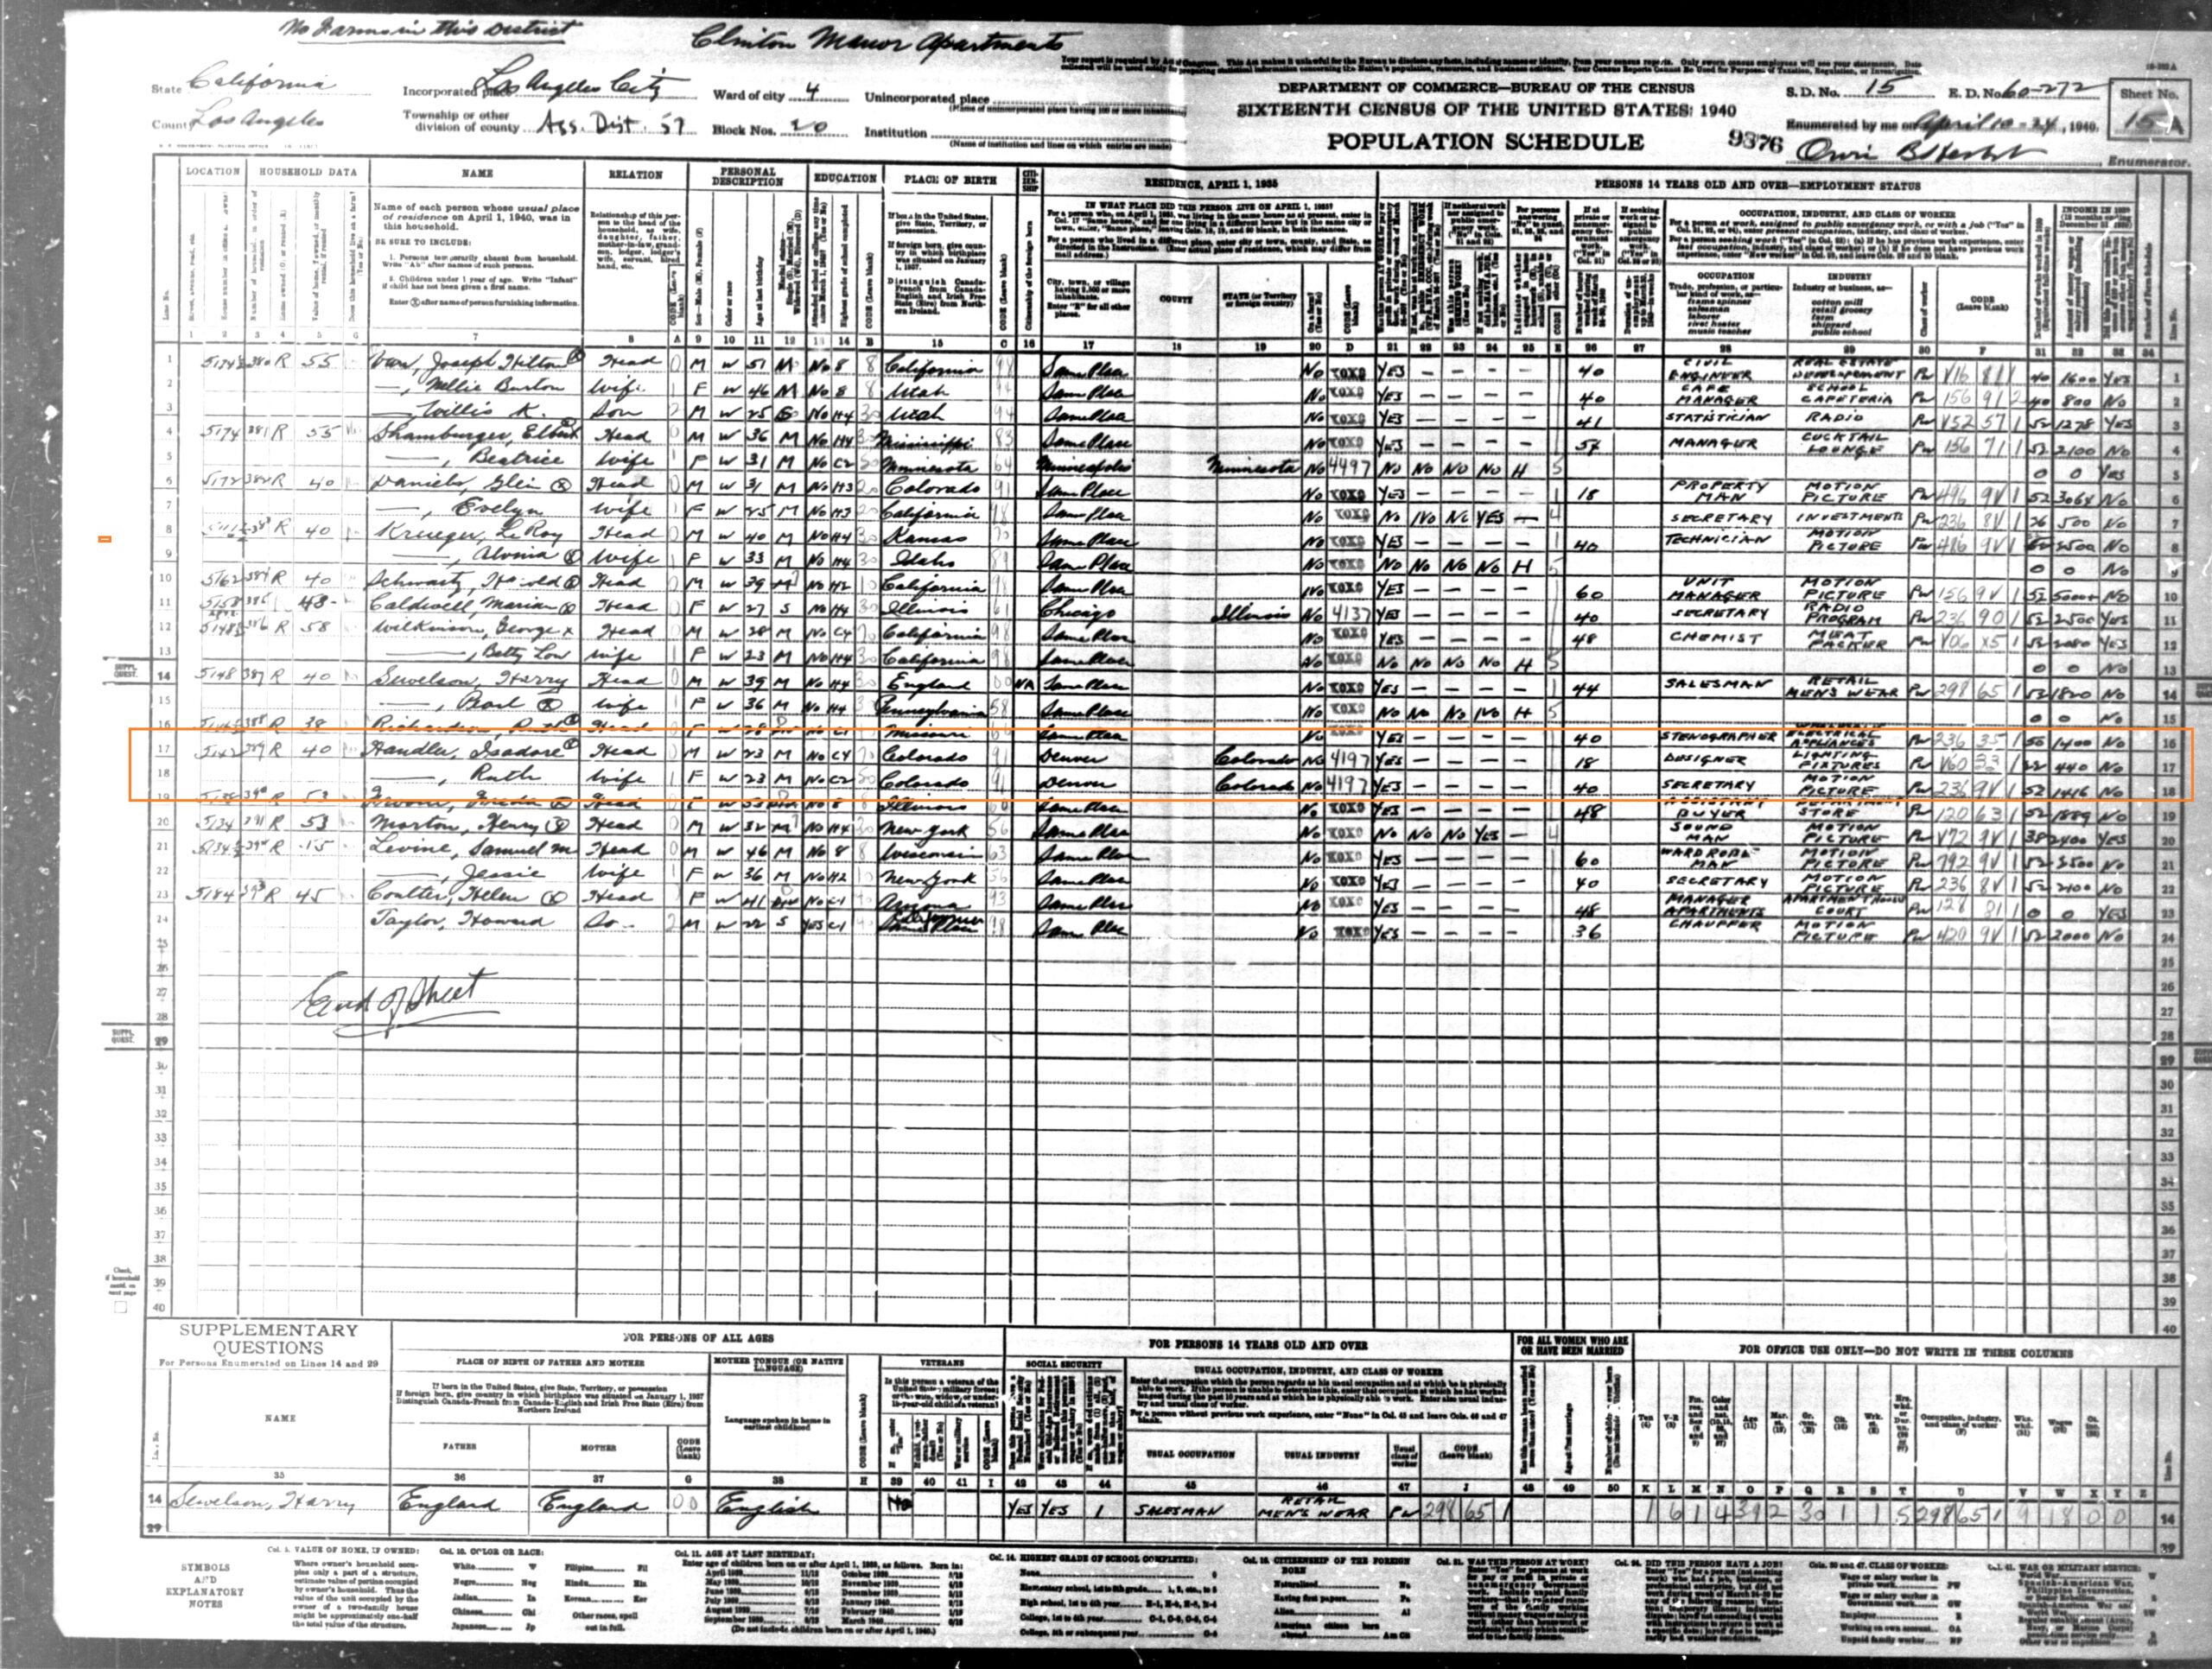 Isadore Elliot and Ruth Hendler in 1940 US Census